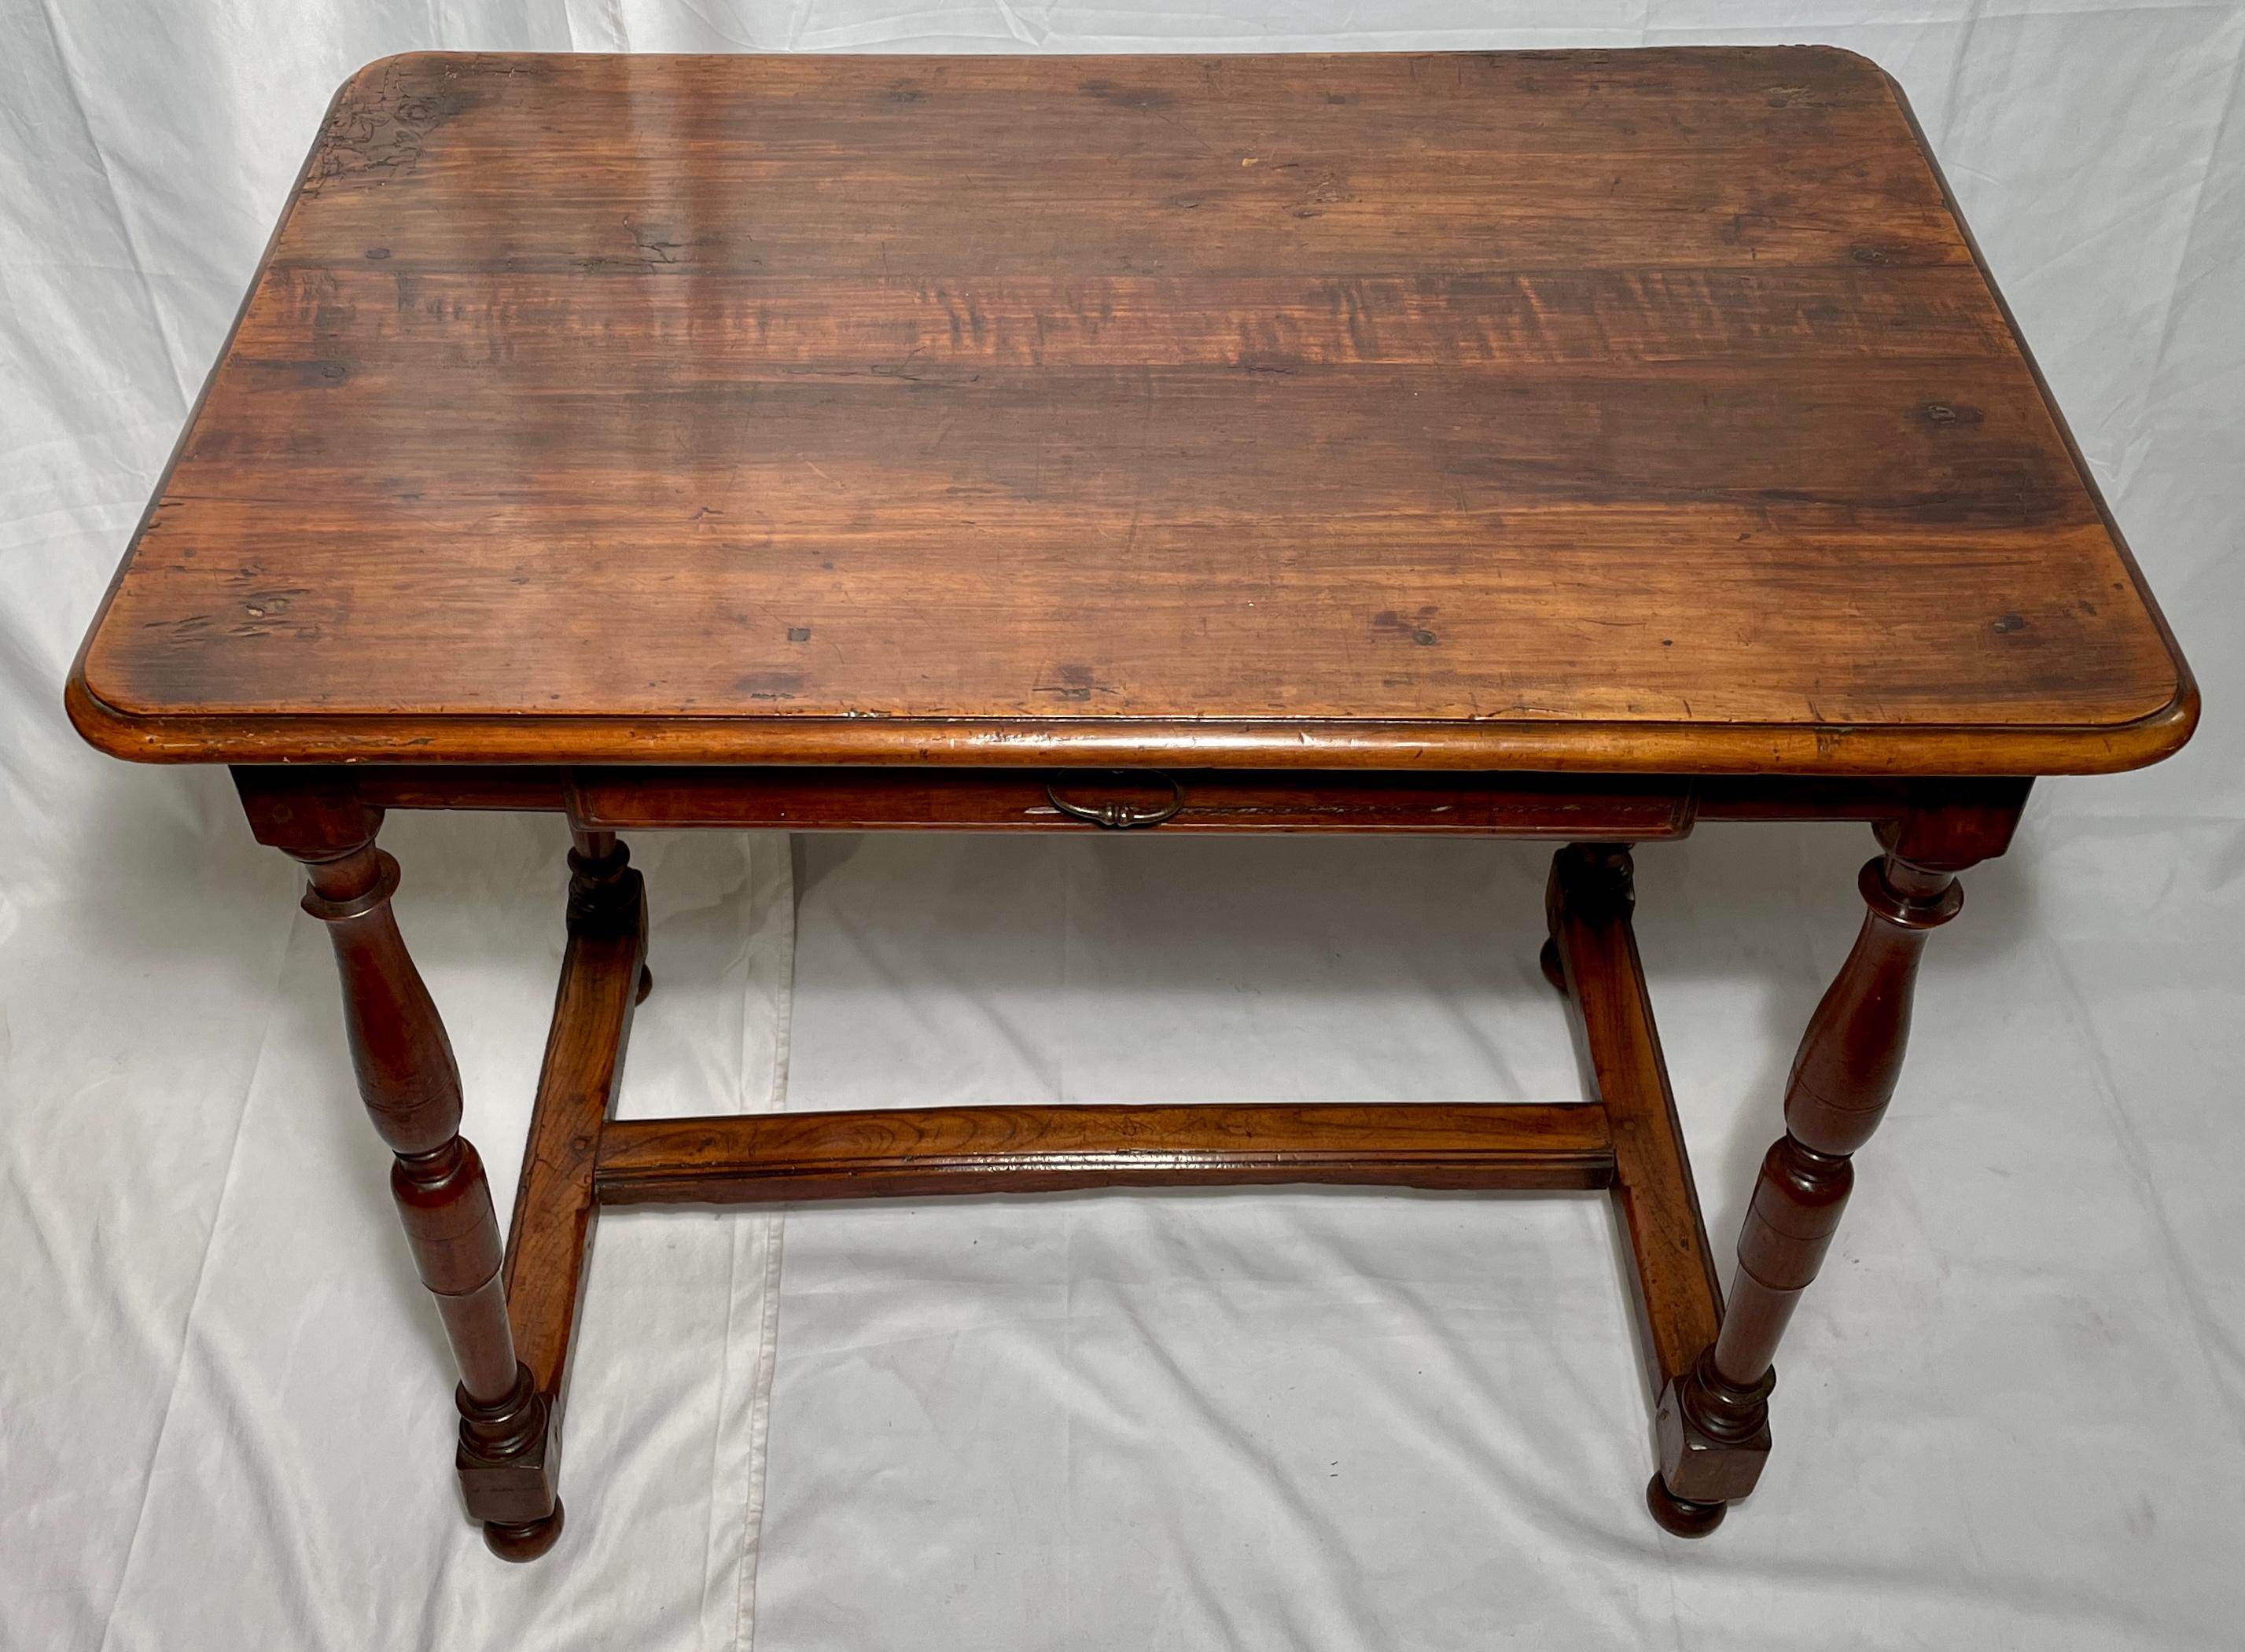 Antique French country walnut table, circa 1890s-1900.